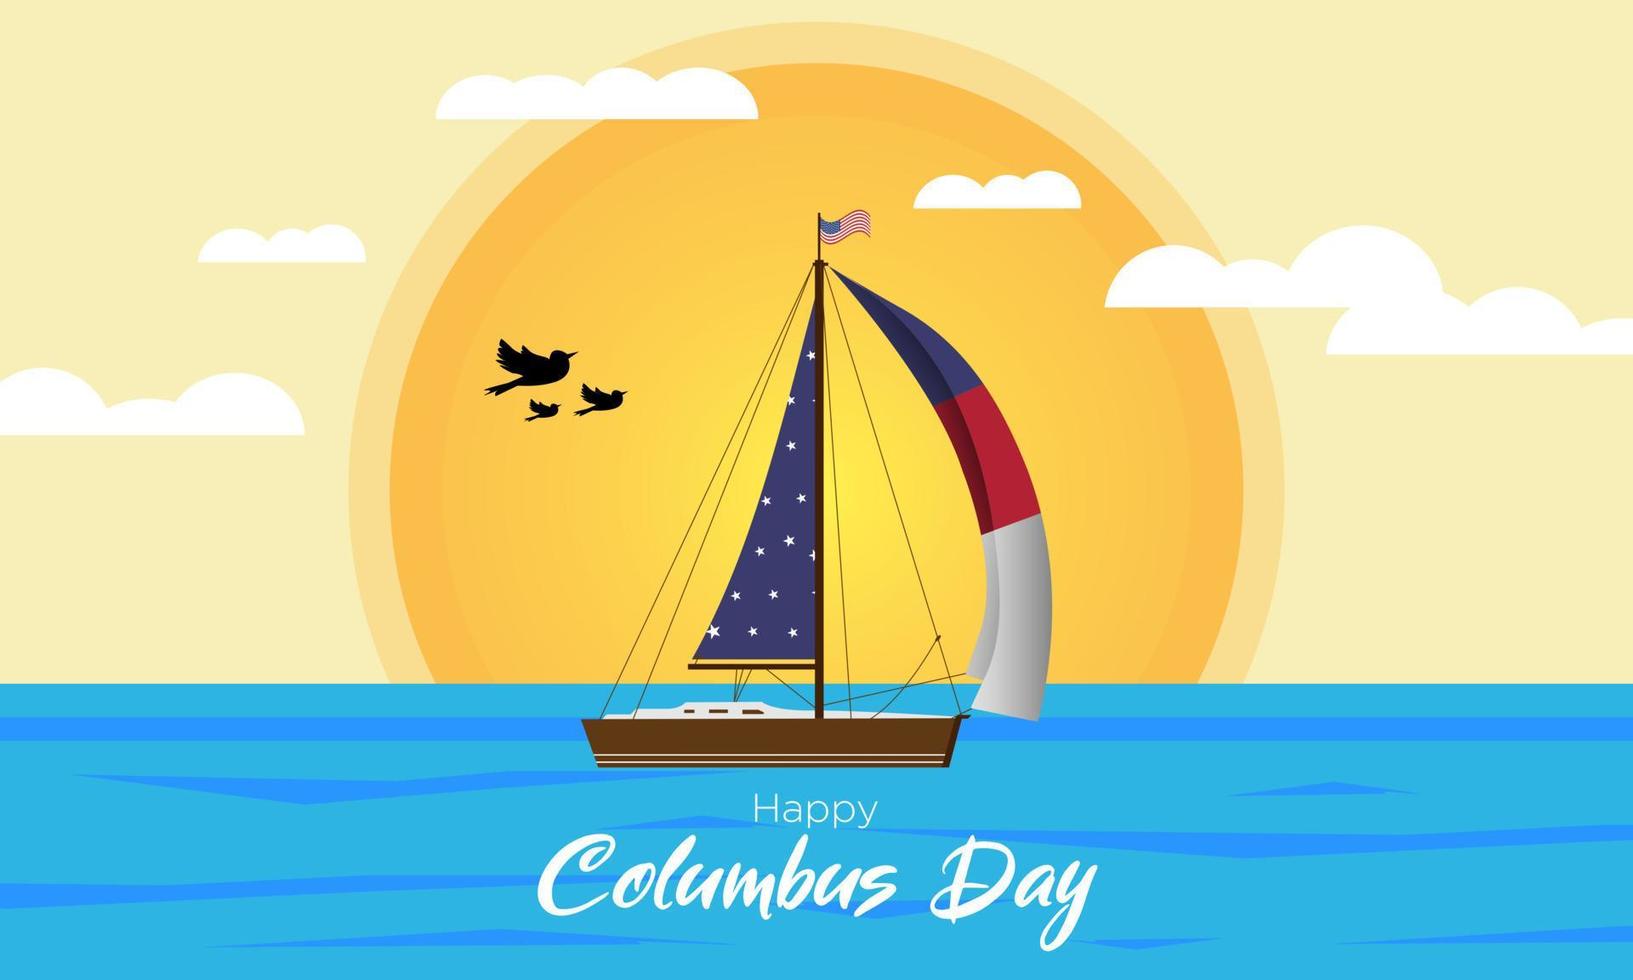 Vector background of sailing ship floating on ocean waves for a happy columbus day celebration